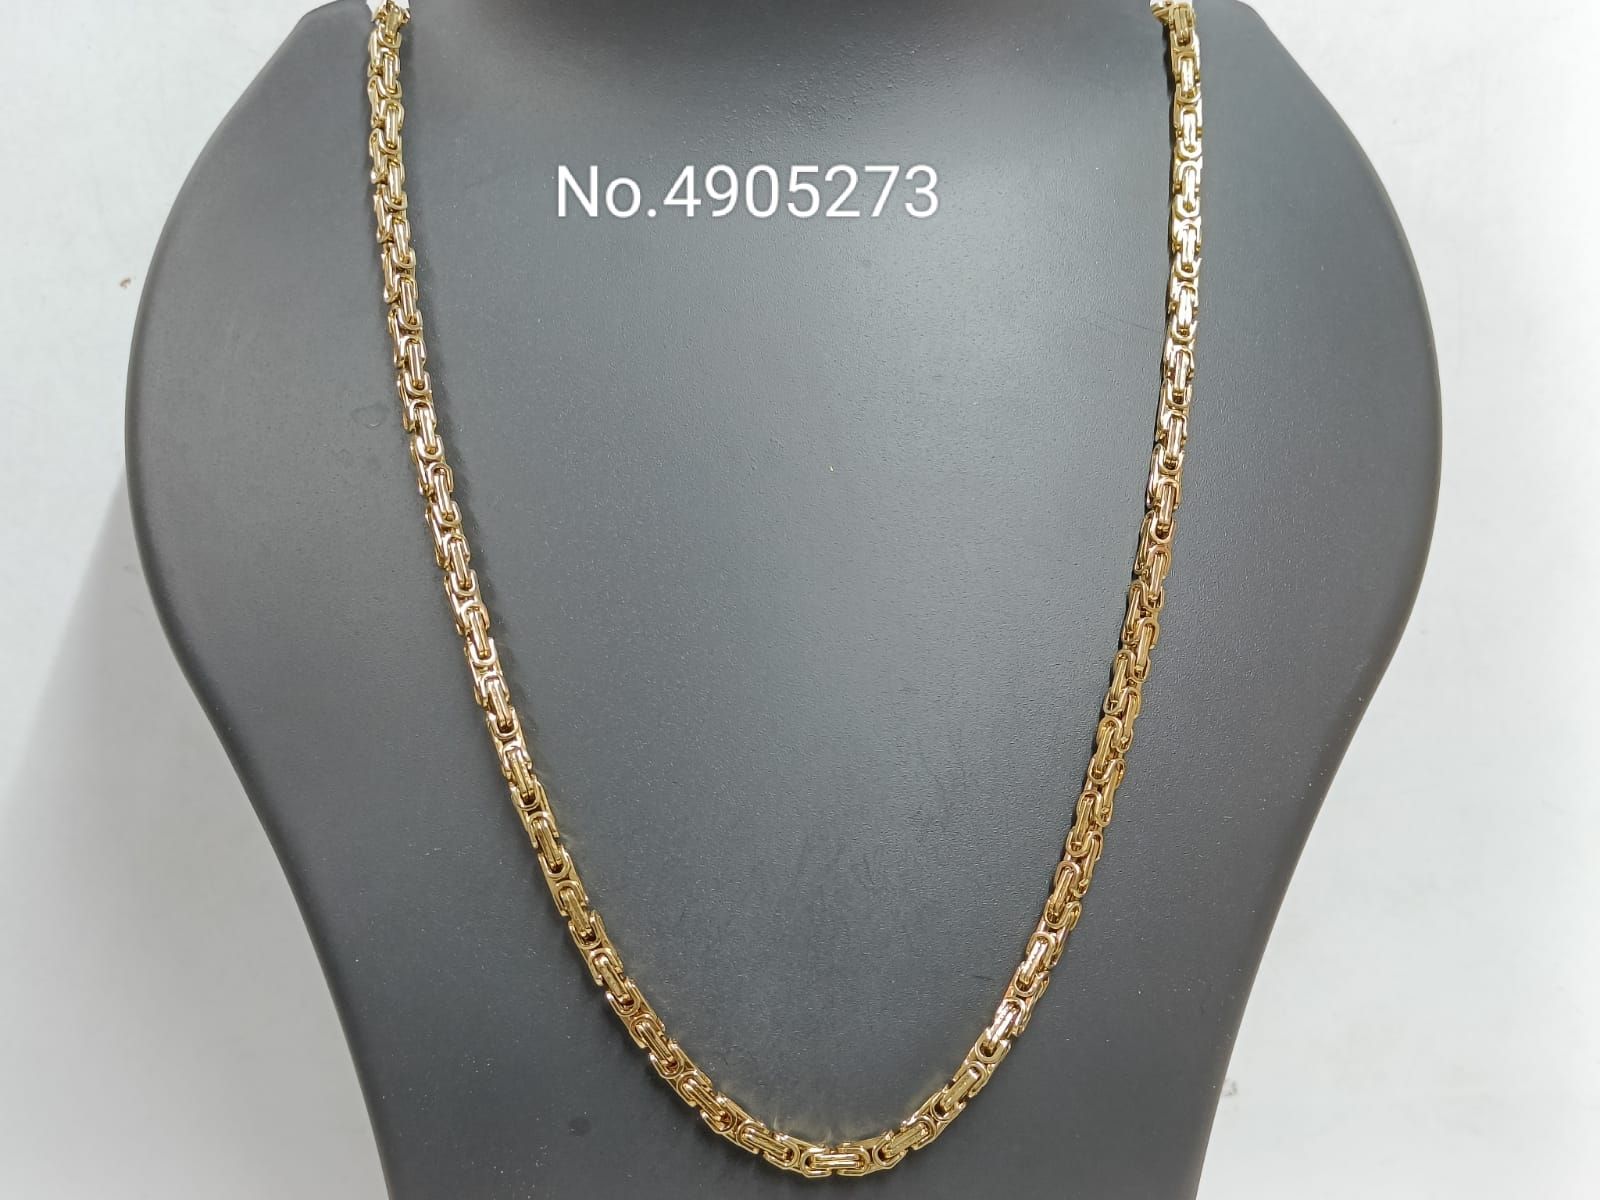 Buy JEWELOPIA 22kt Golden Chain For Men Necklace Chain Gold Plated Chain  For Boys & Men (Gold, 22 Inch) (Gold, 22) at Amazon.in